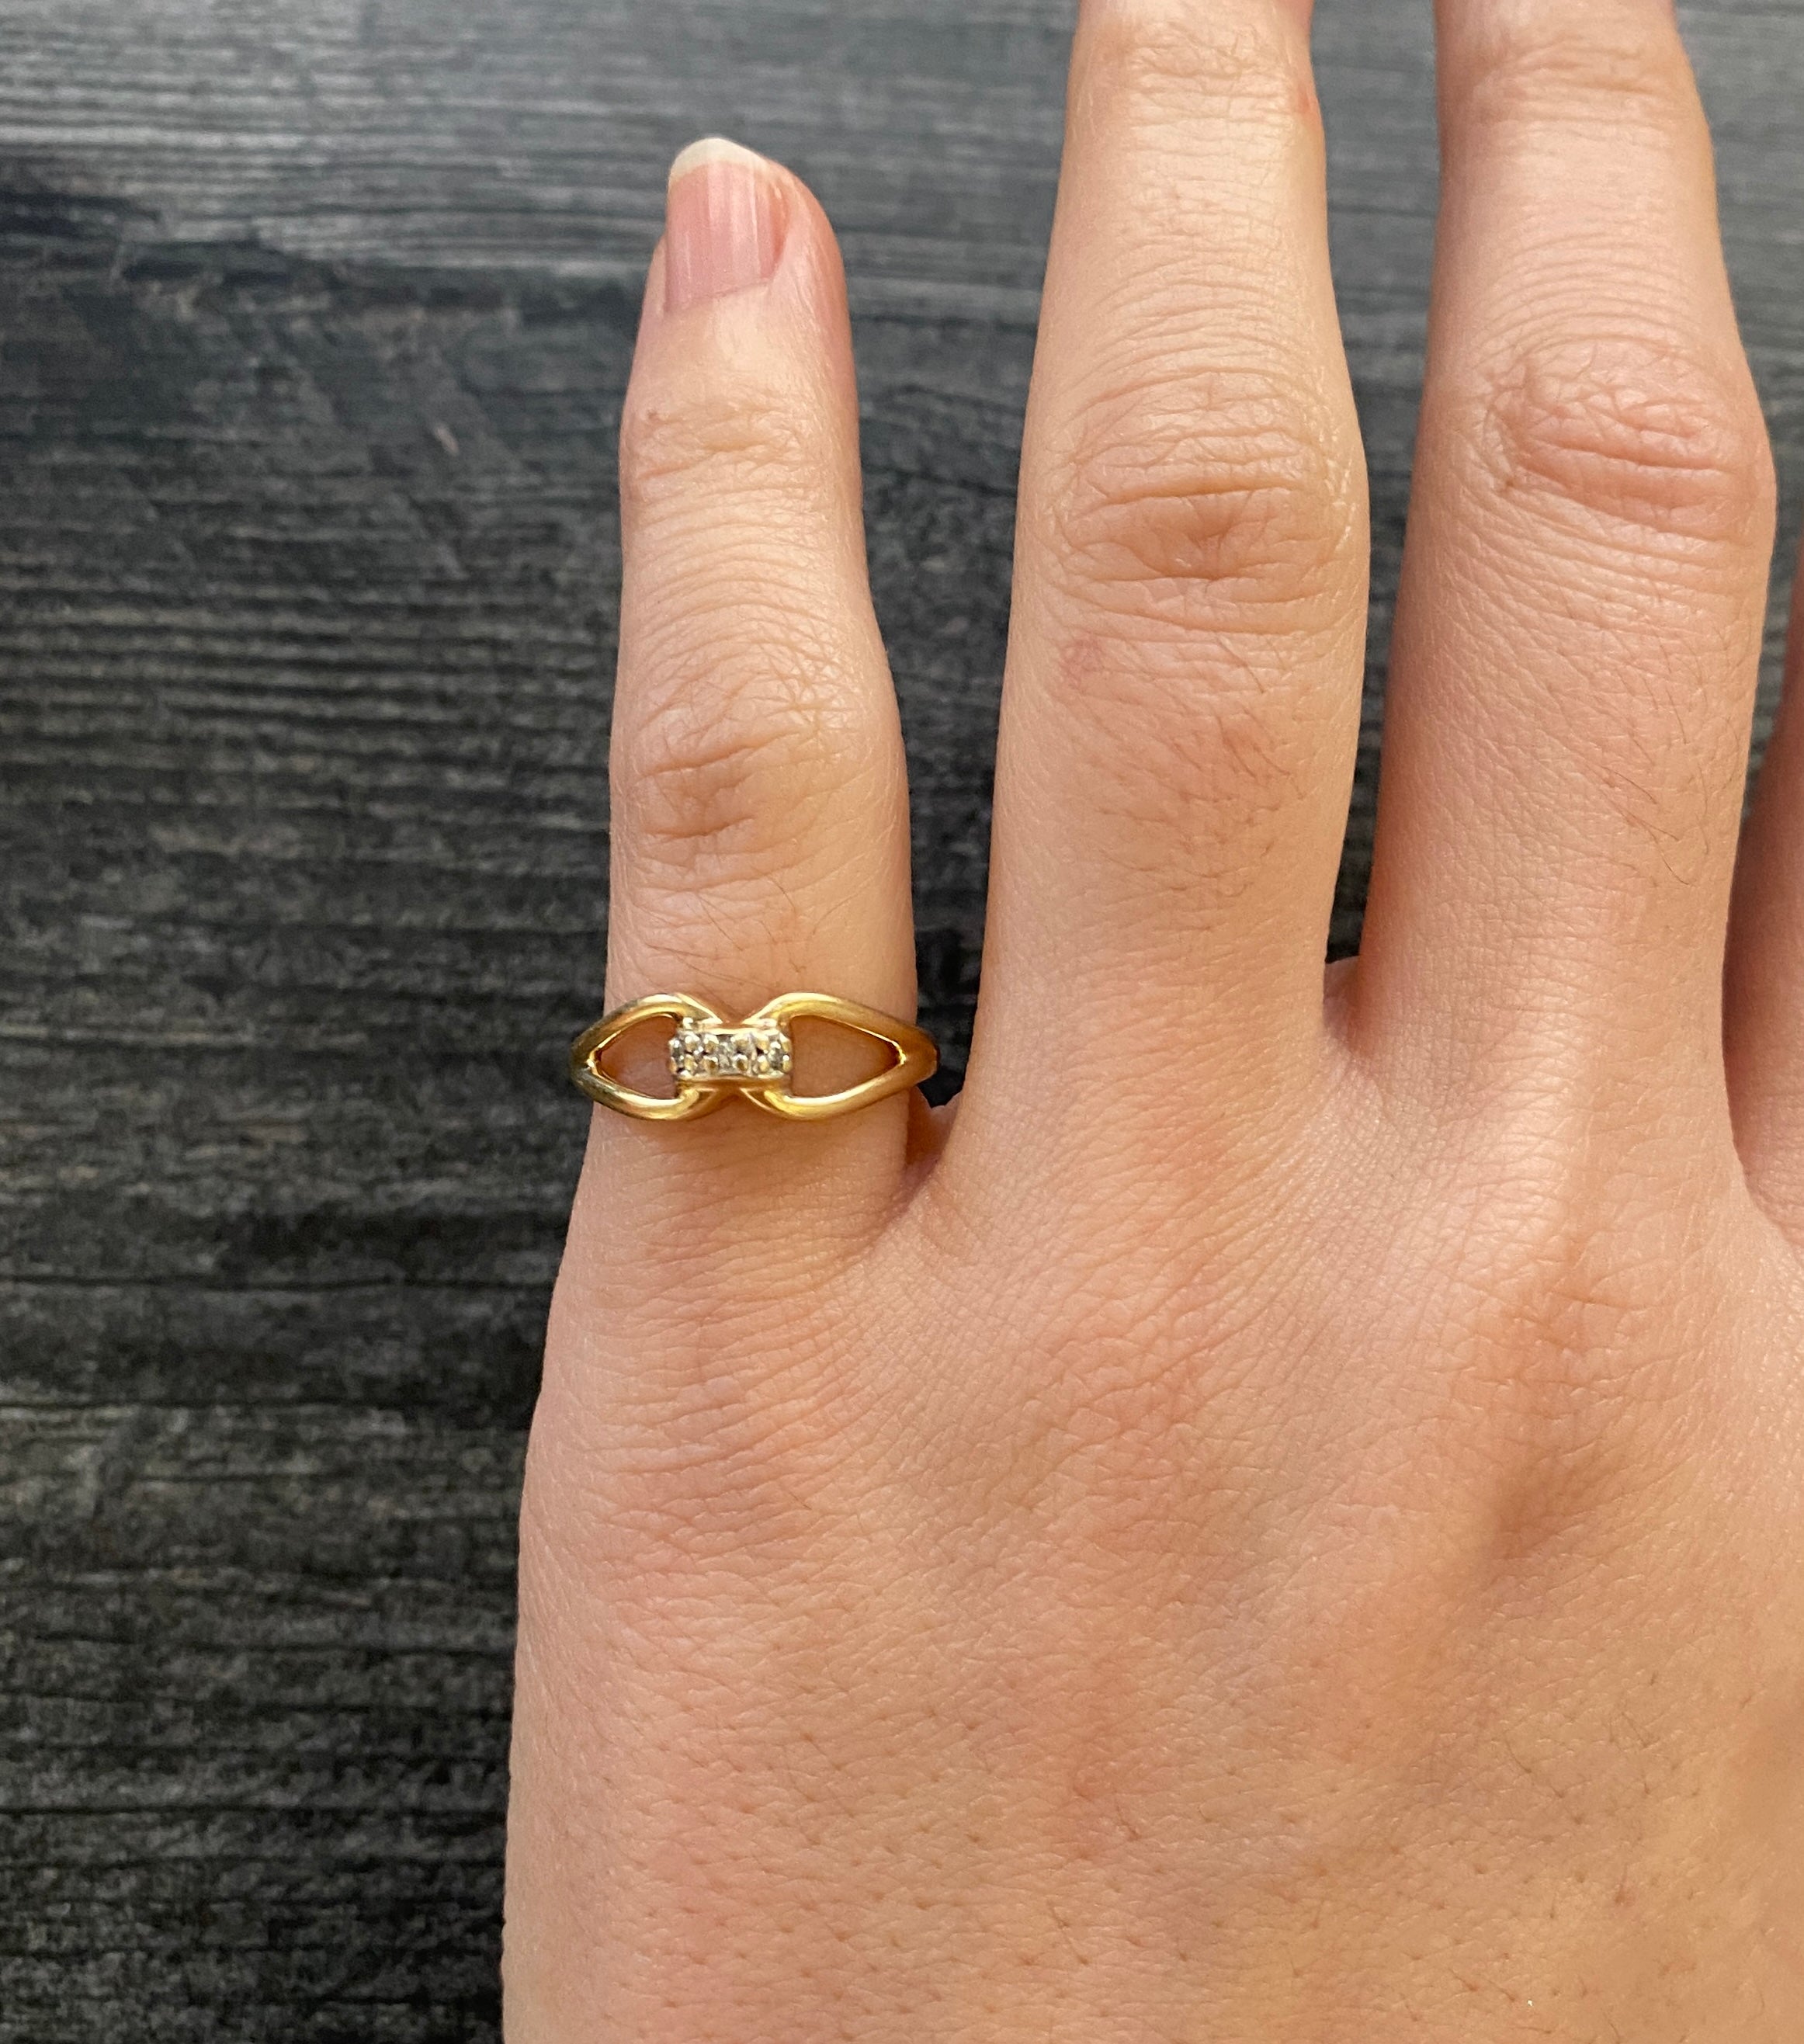 Gleaming Gold Infinity Ring - Plante Jewelers